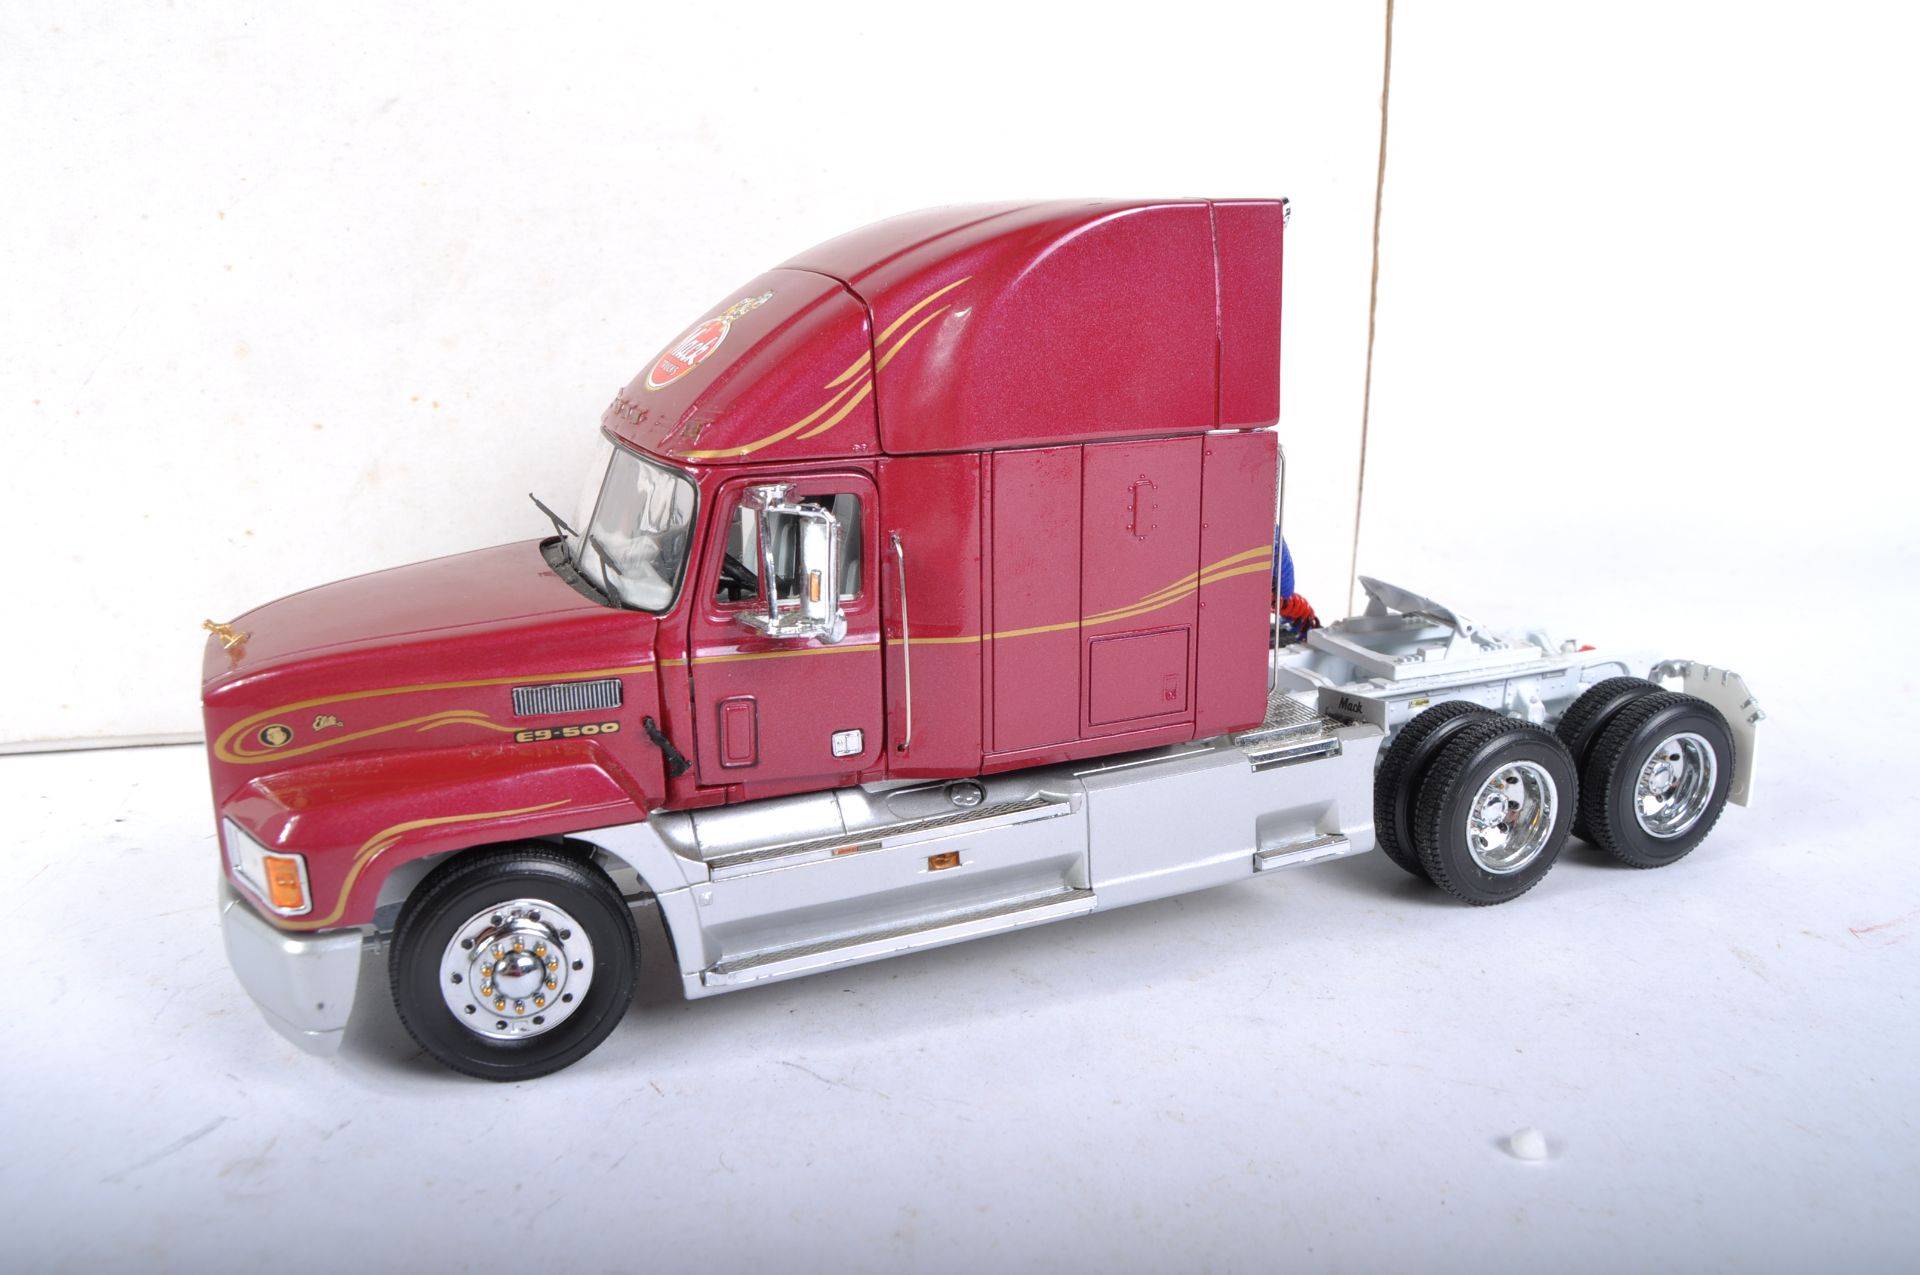 FRANKLIN MINT 1/32 SCALE PRECISION DIECAST MACK ELIITE TRUCK - Image 2 of 6